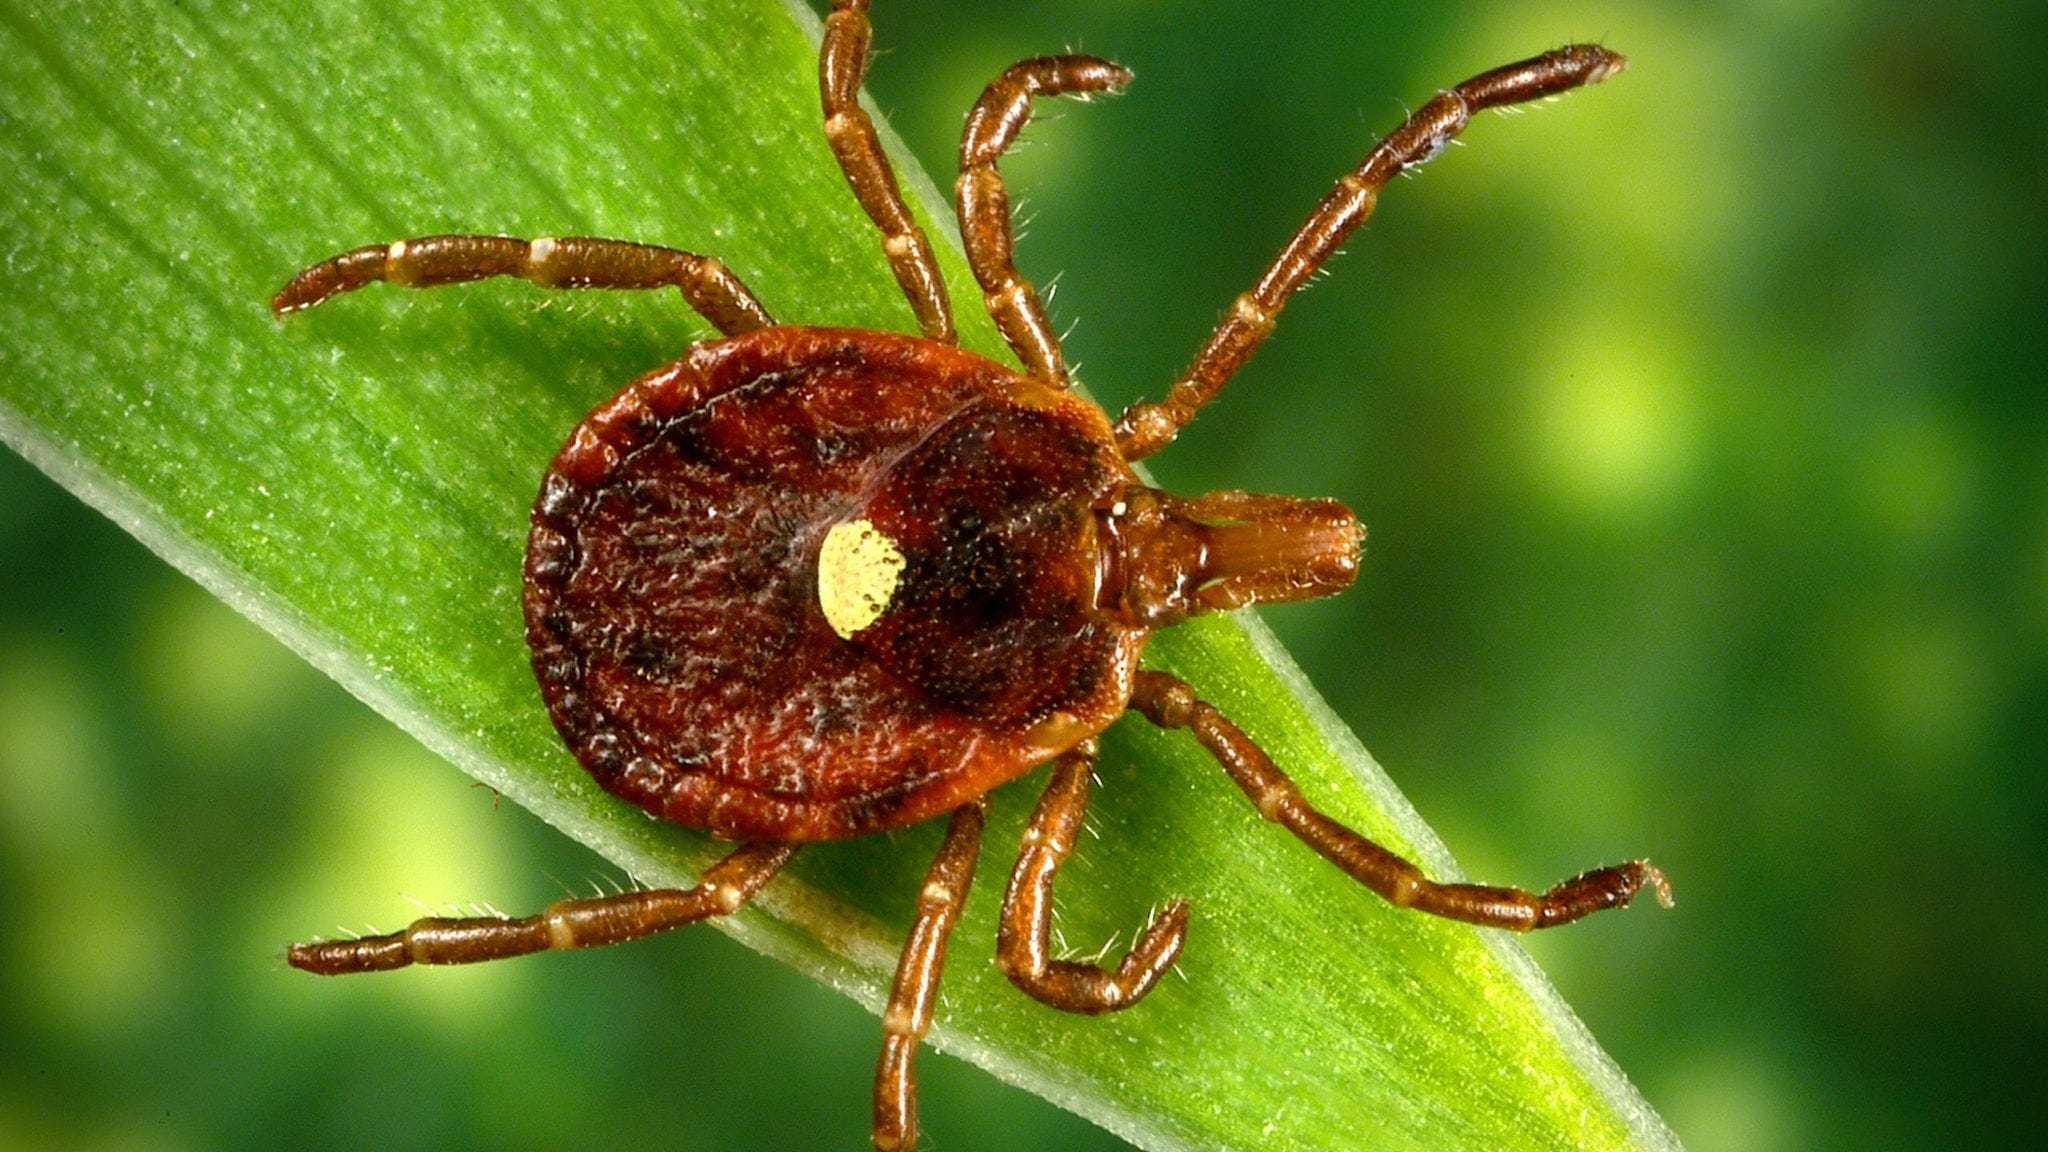 Lone star tick bite can cause red meat allergy. Is it in NY? What the data tells us